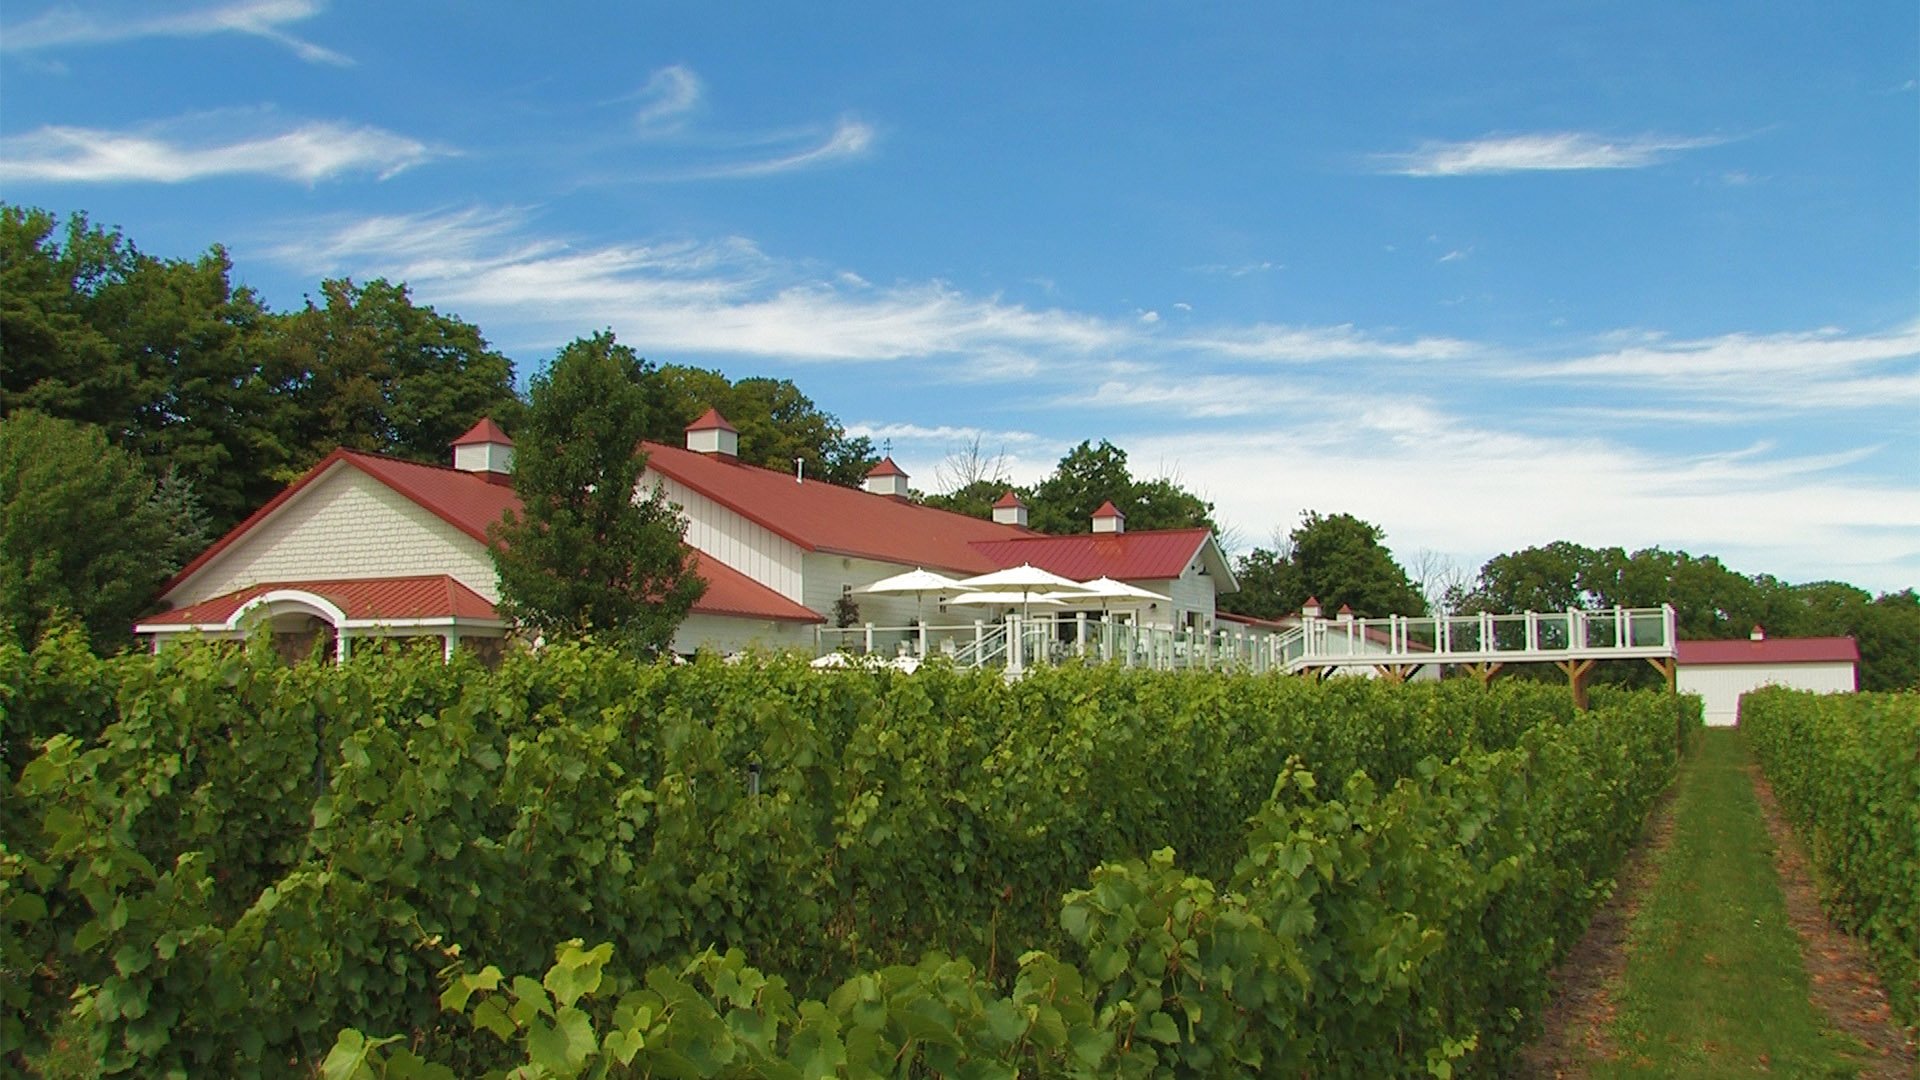 These 9 Beautiful Wineries In Michigan Are A Must